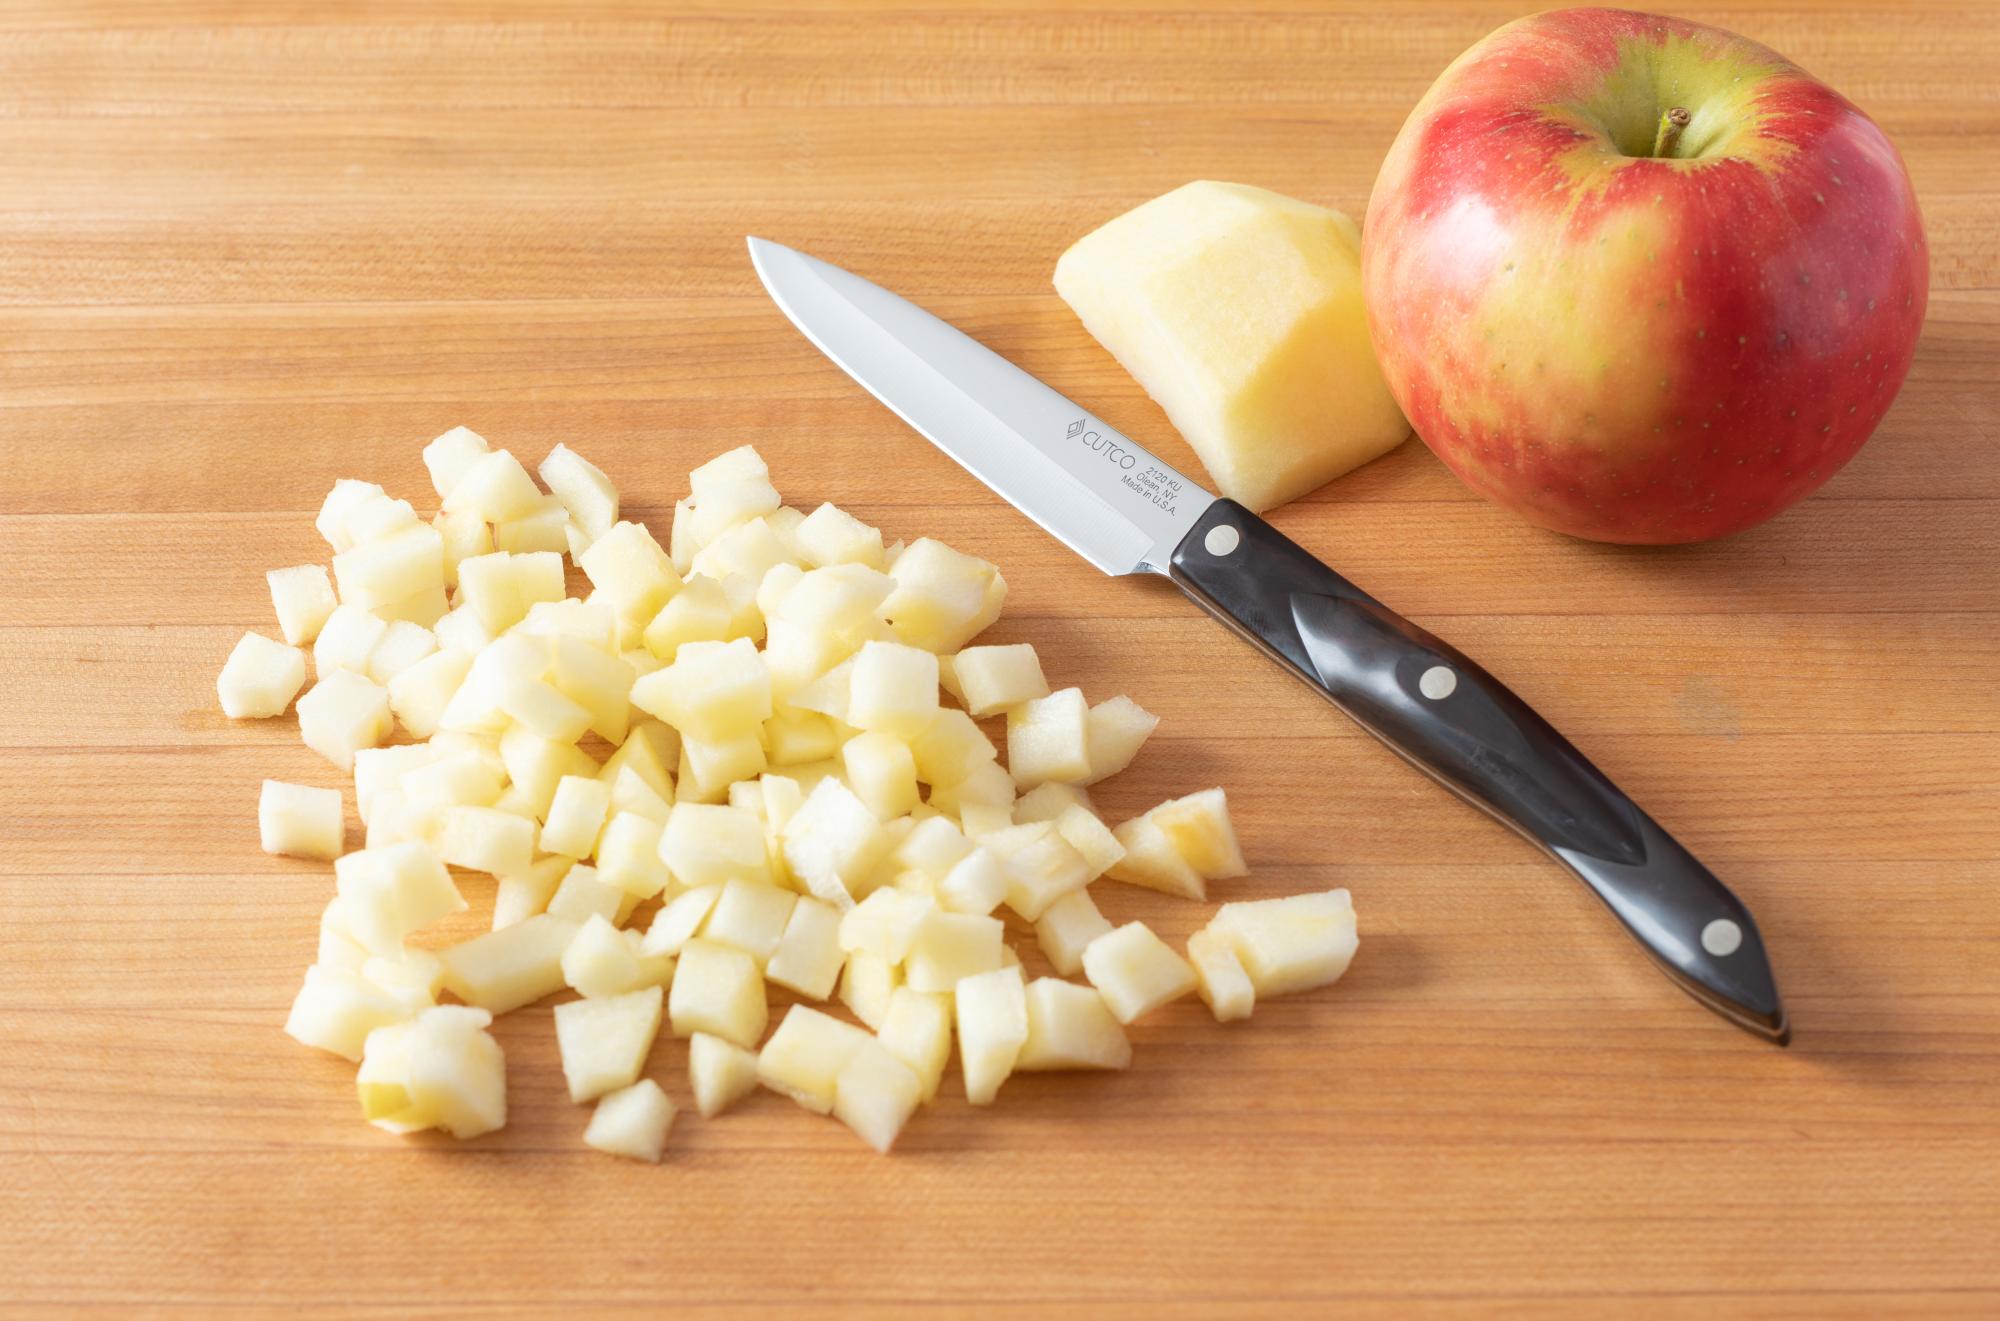 Dice the apple with a 4 Inch Paring Knife.